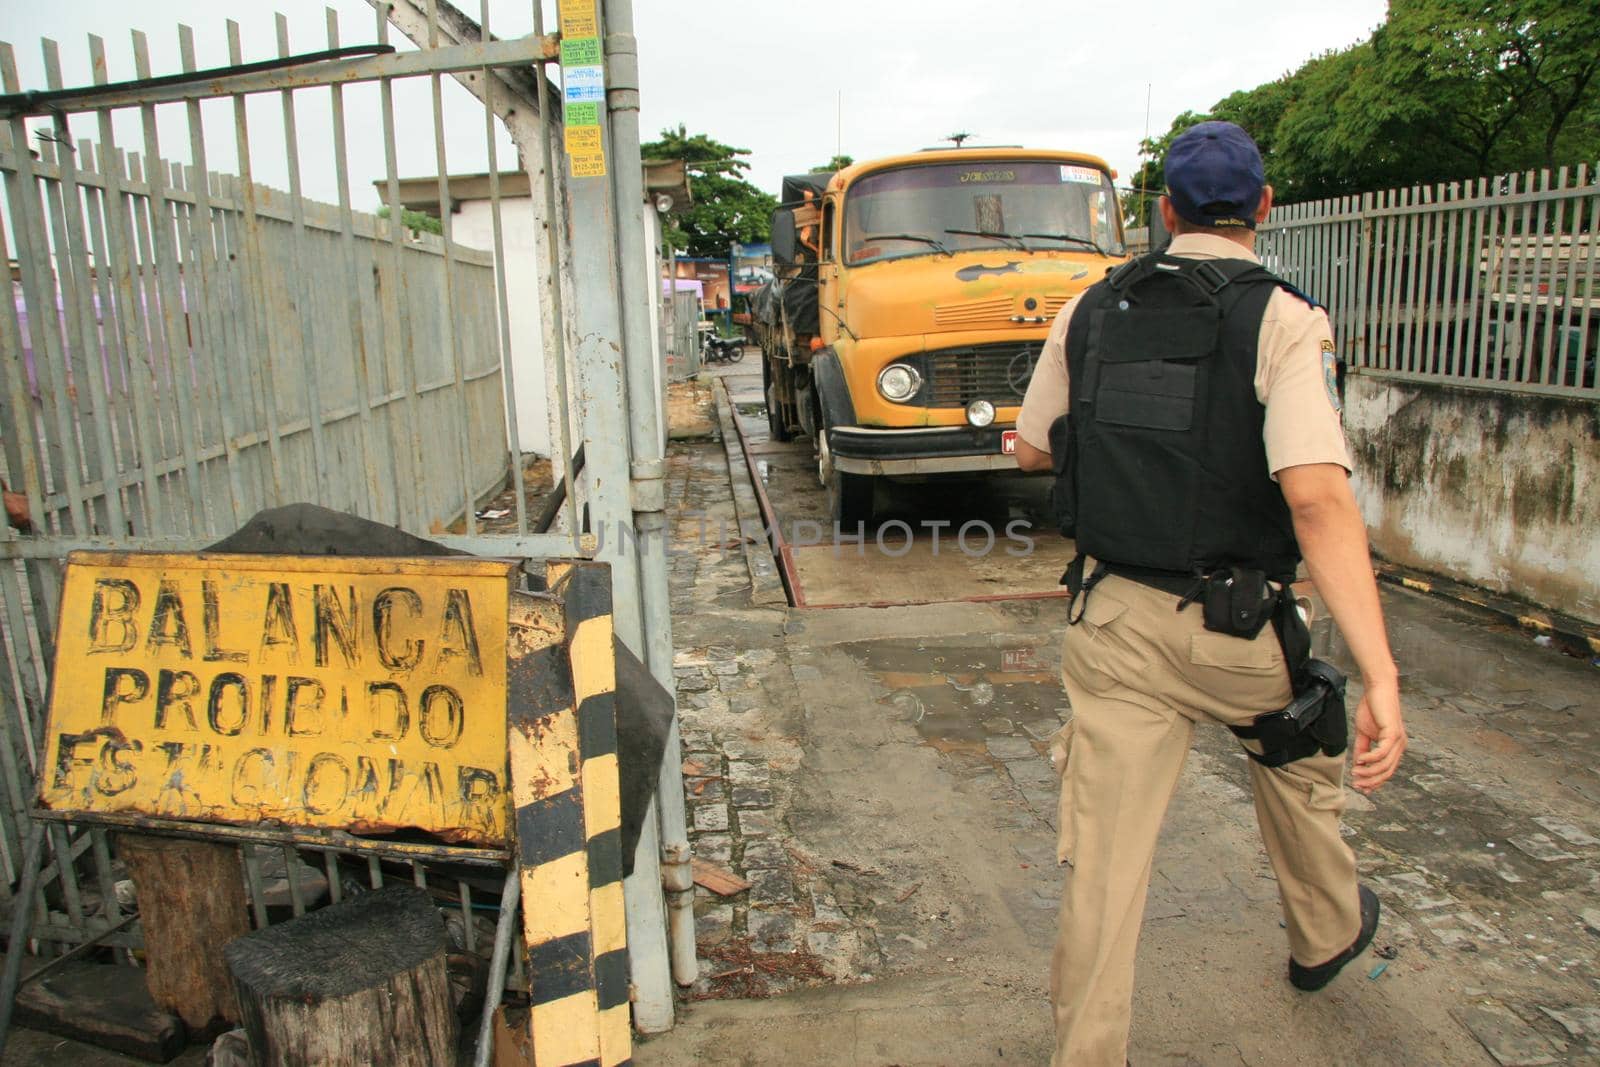 eunapolis, bahia / brazil - may 6, 2009: Federal Highway Police officer spotted during Operation on BR 101 Highway oversees overweight cargo vehicles.